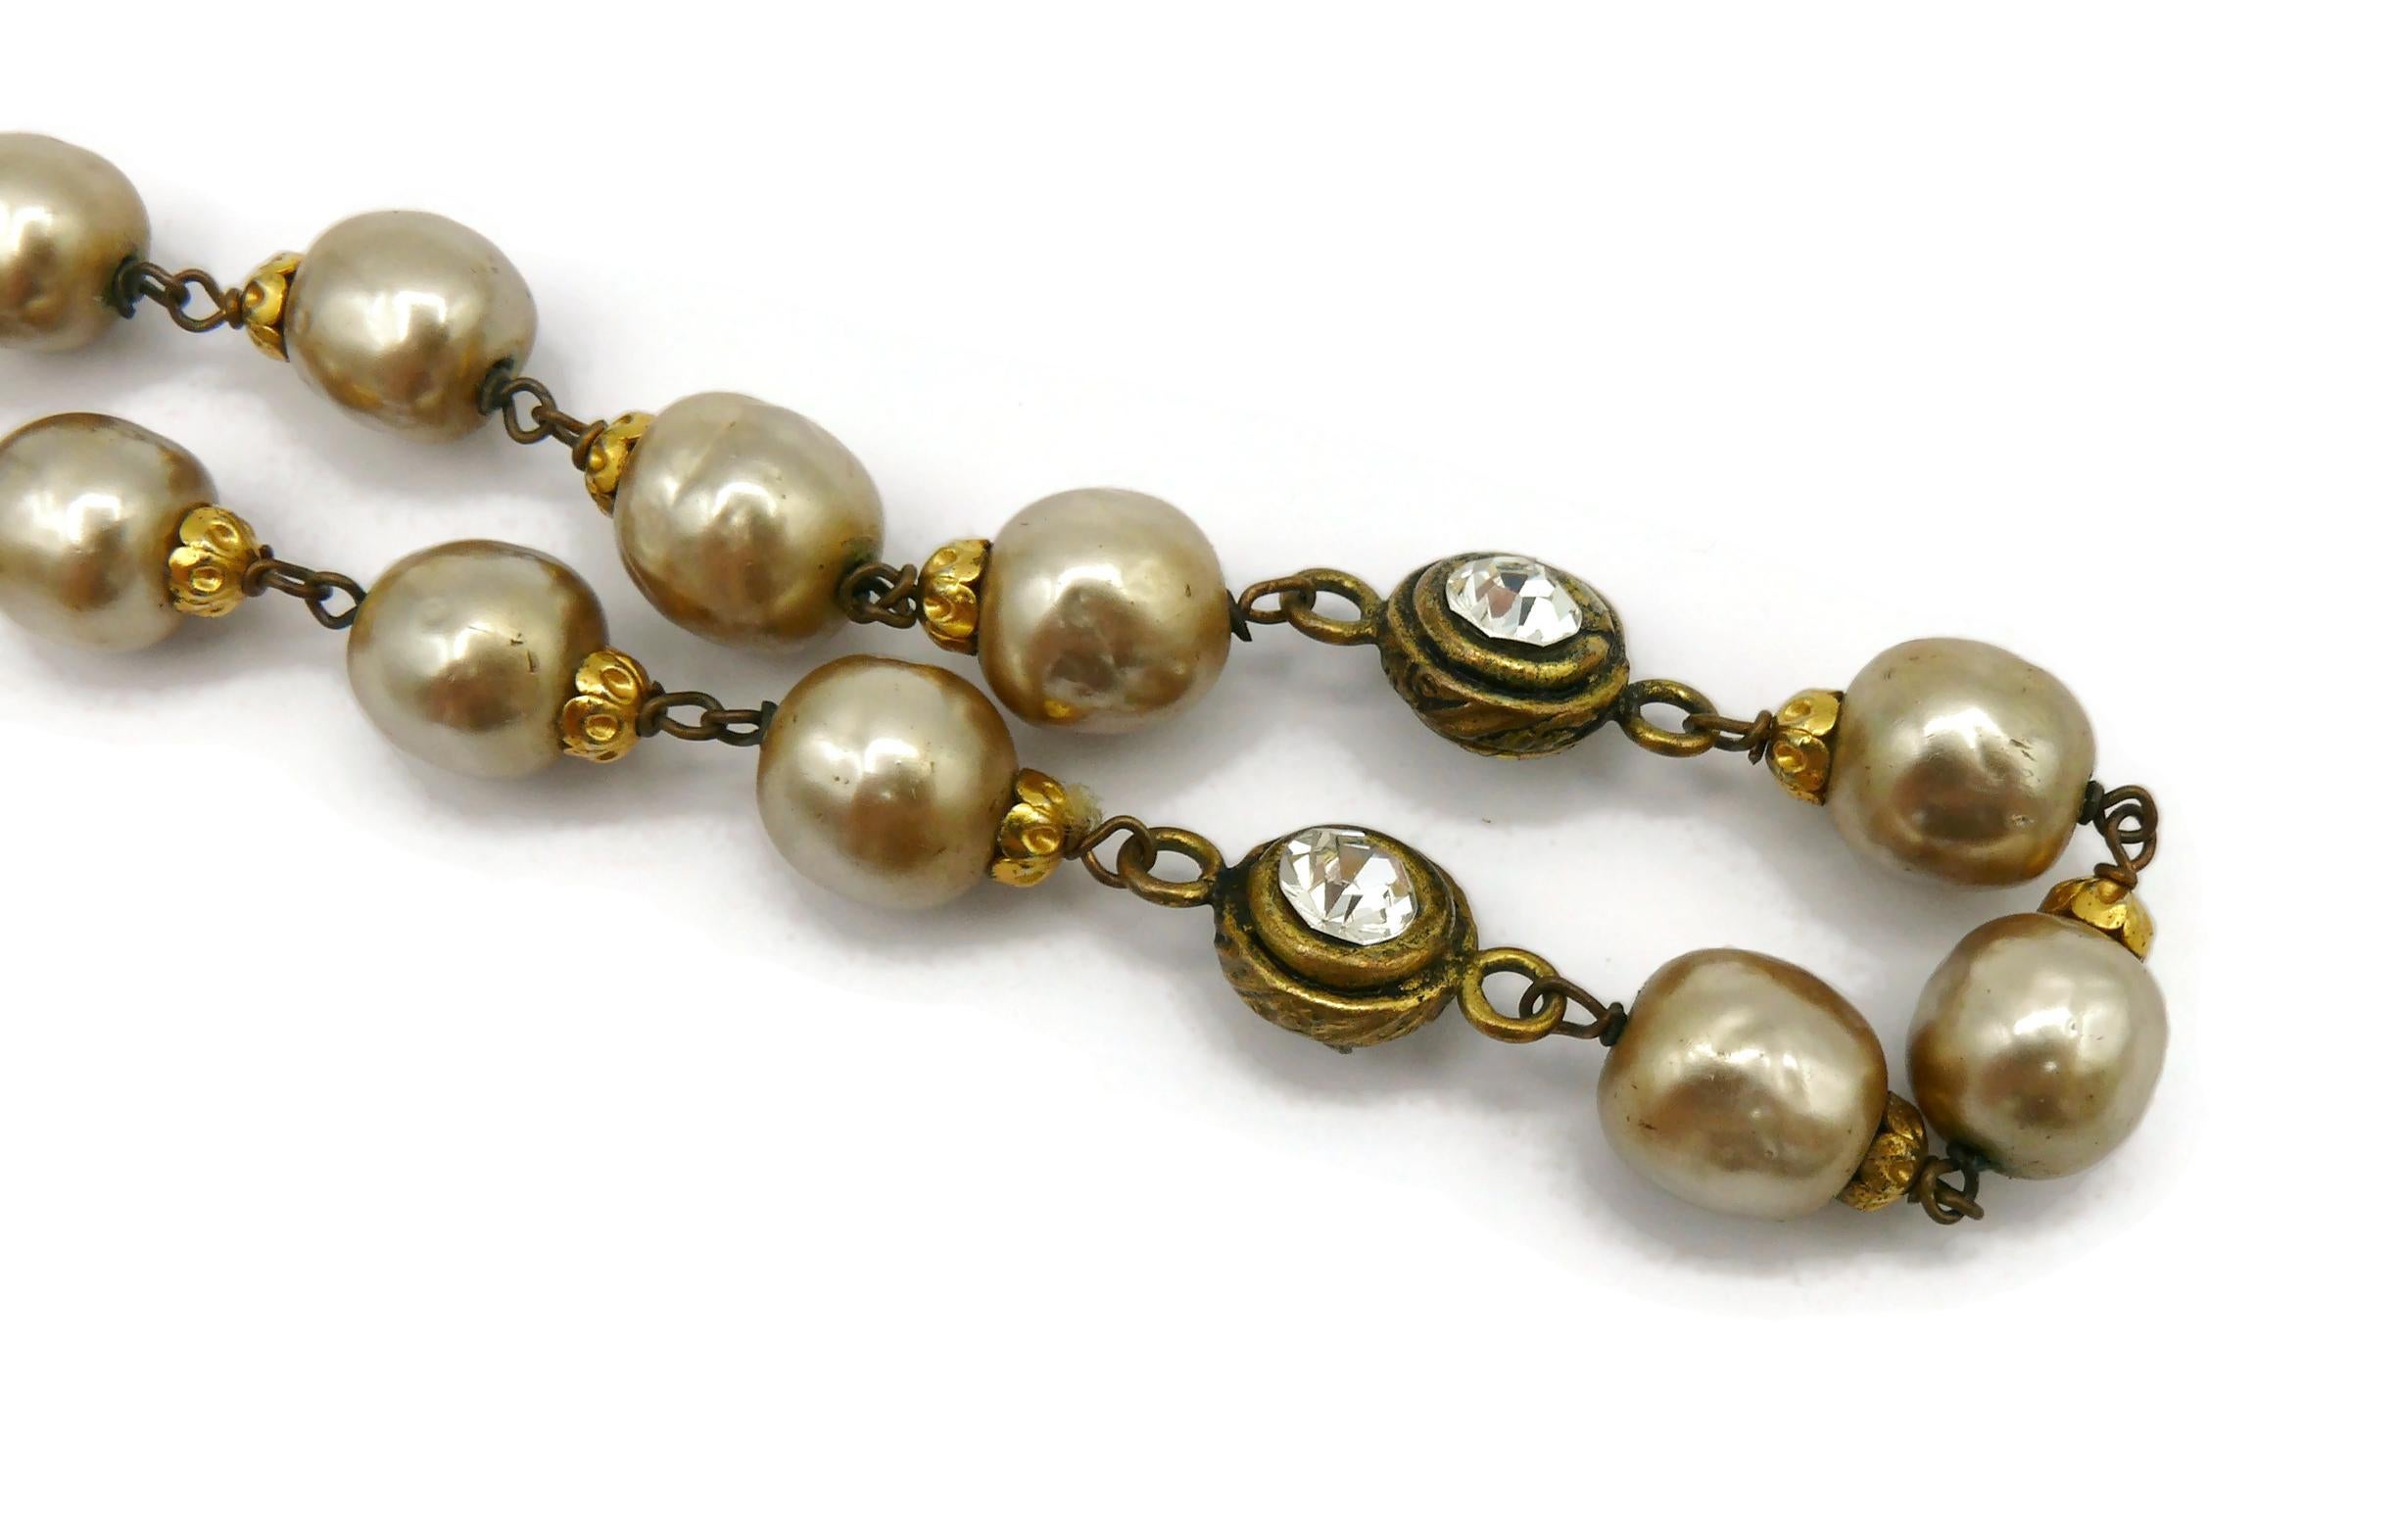 CHANEL Vintage Pearl & Crystal Sautoir Necklace, 1983 For Sale 7